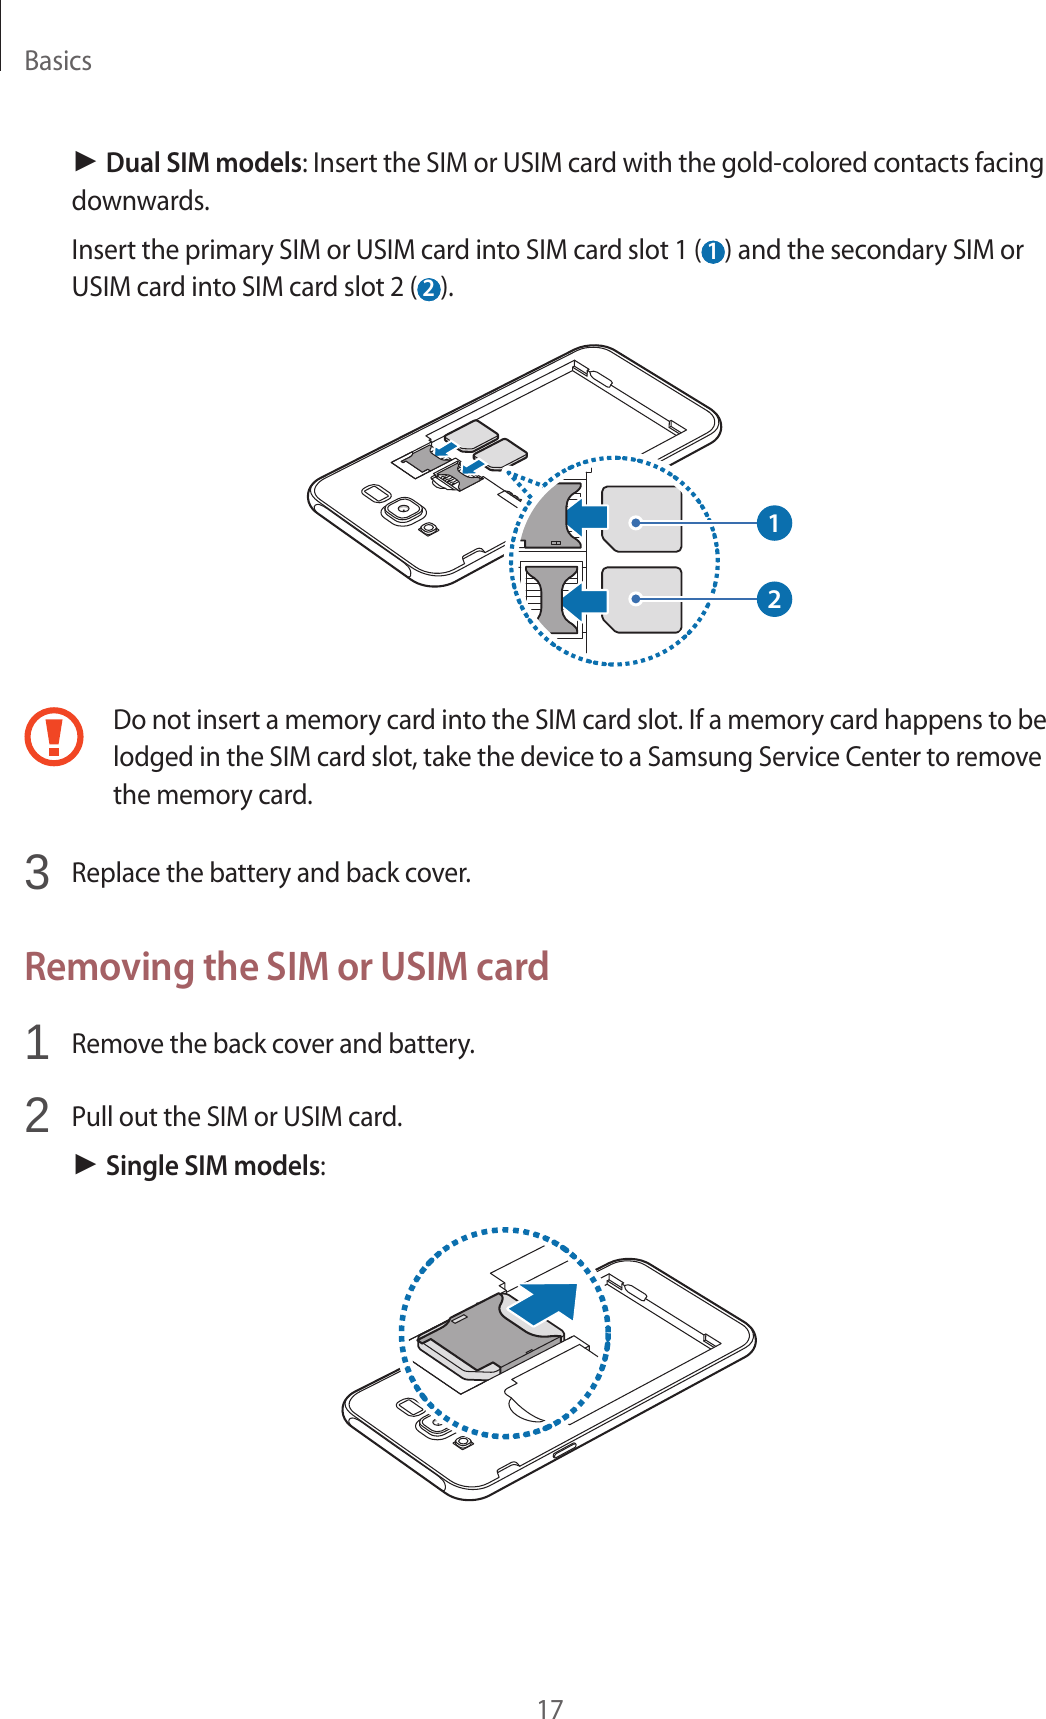 Basics17► Dual SIM models: Insert the SIM or USIM card with the gold-colored contacts facing downwards.Insert the primary SIM or USIM card into SIM card slot 1 ( 1 ) and the secondary SIM or USIM card into SIM card slot 2 ( 2 ).12Do not insert a memory card into the SIM card slot. If a memory card happens to be lodged in the SIM card slot, take the device to a Samsung Service Center to remove the memory card.3  Replace the battery and back cover.Removing the SIM or USIM card1  Remove the back cover and battery.2  Pull out the SIM or USIM card.► Single SIM models: